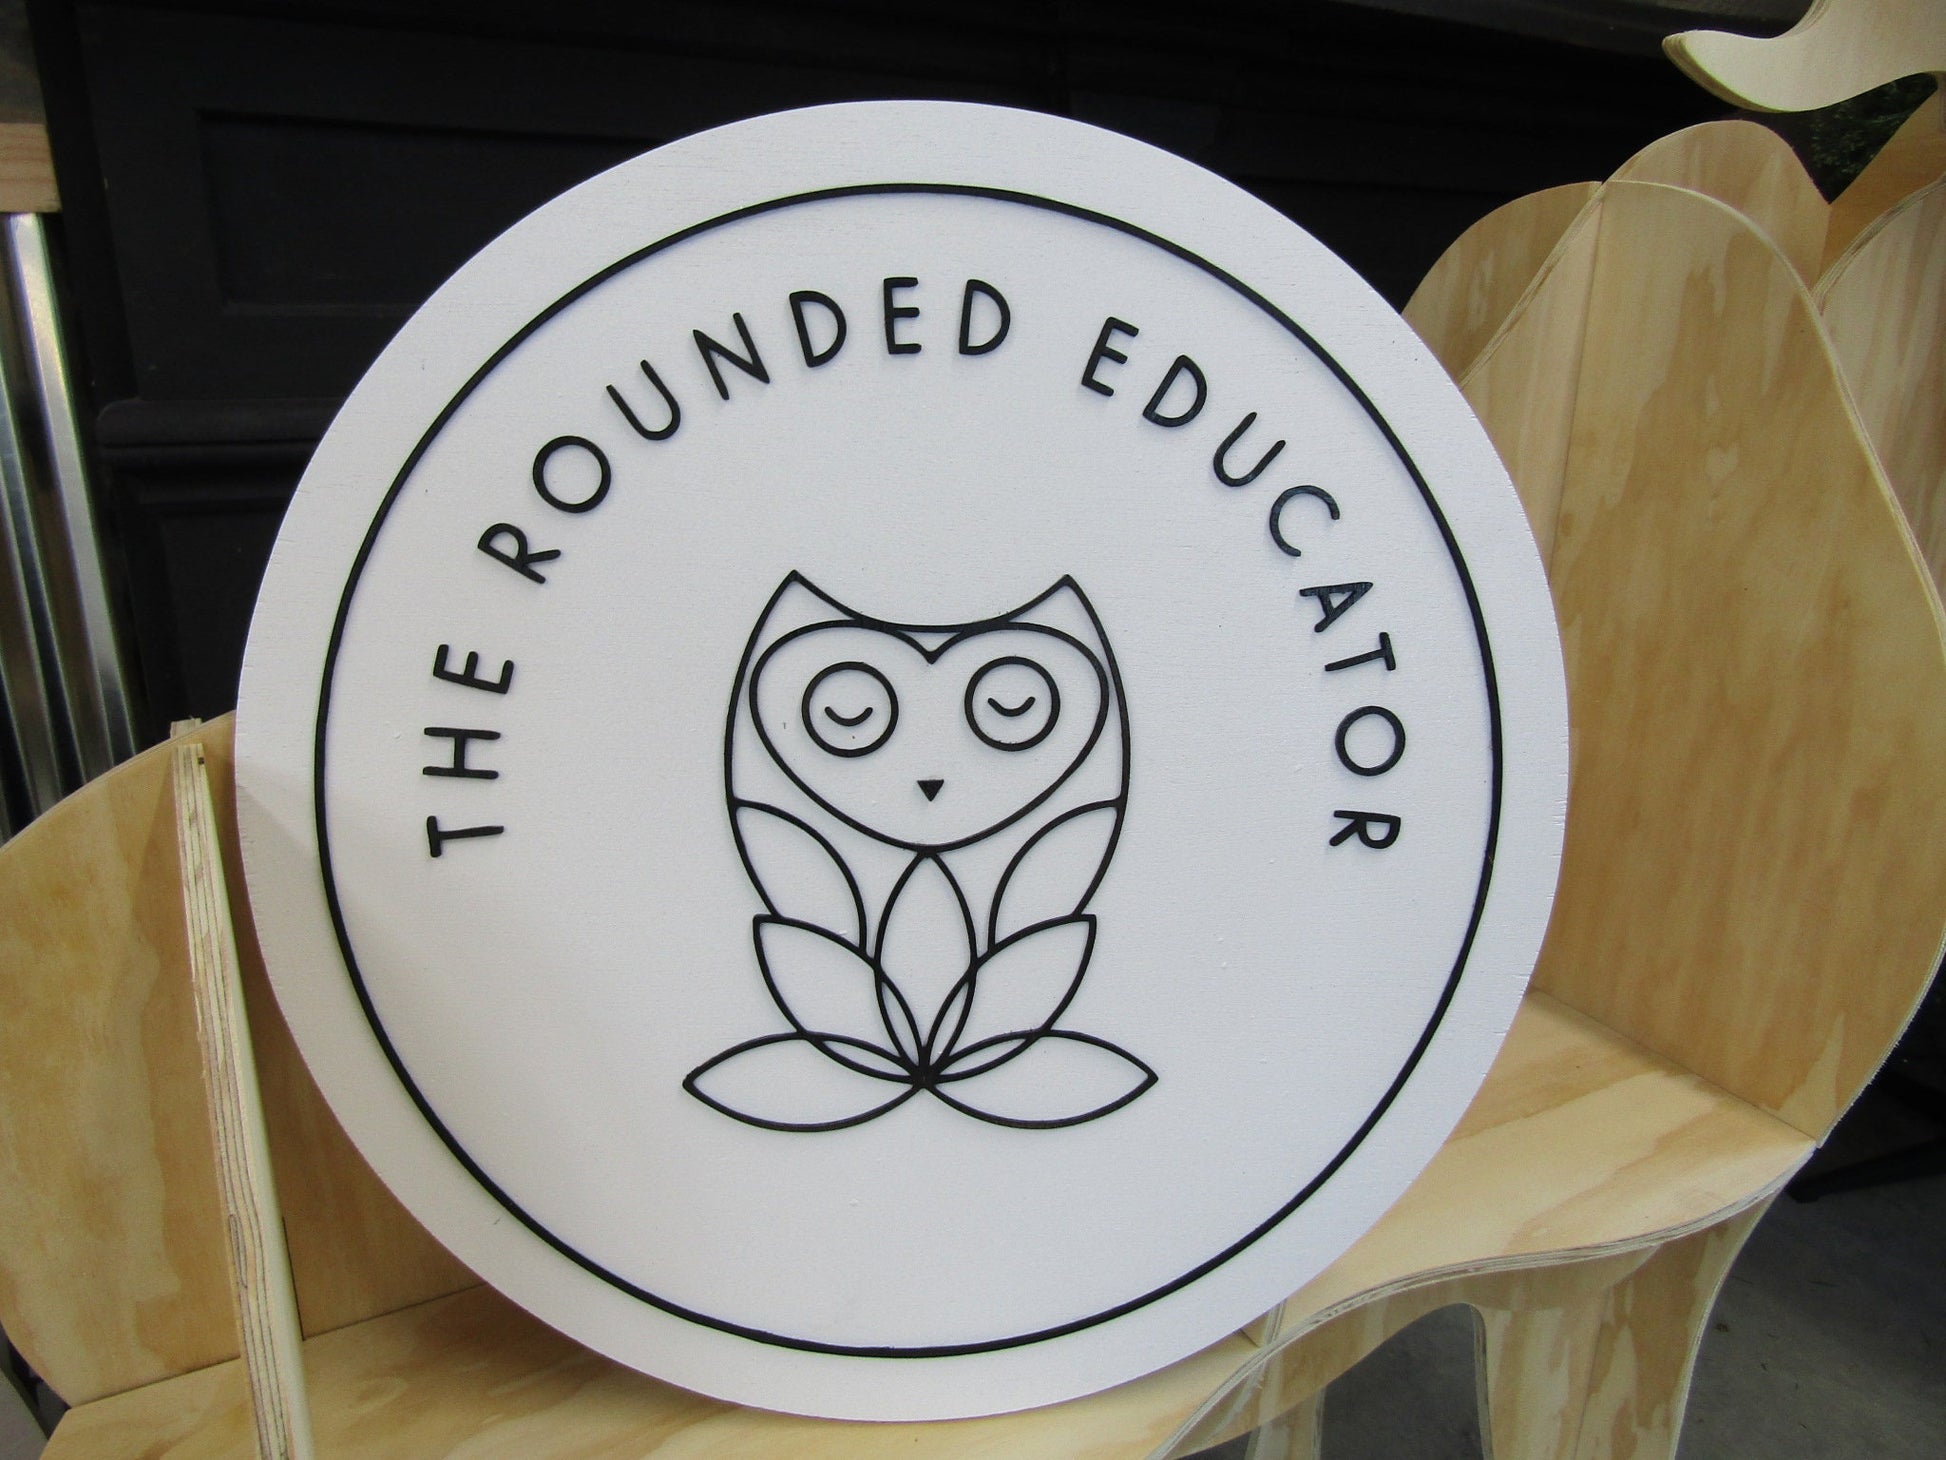 Custom Sign Round Commerical Signage Minimalist Made to Order Rounded Educator Owl Store Front Small Shop Logo School Circle Wooden Handmade